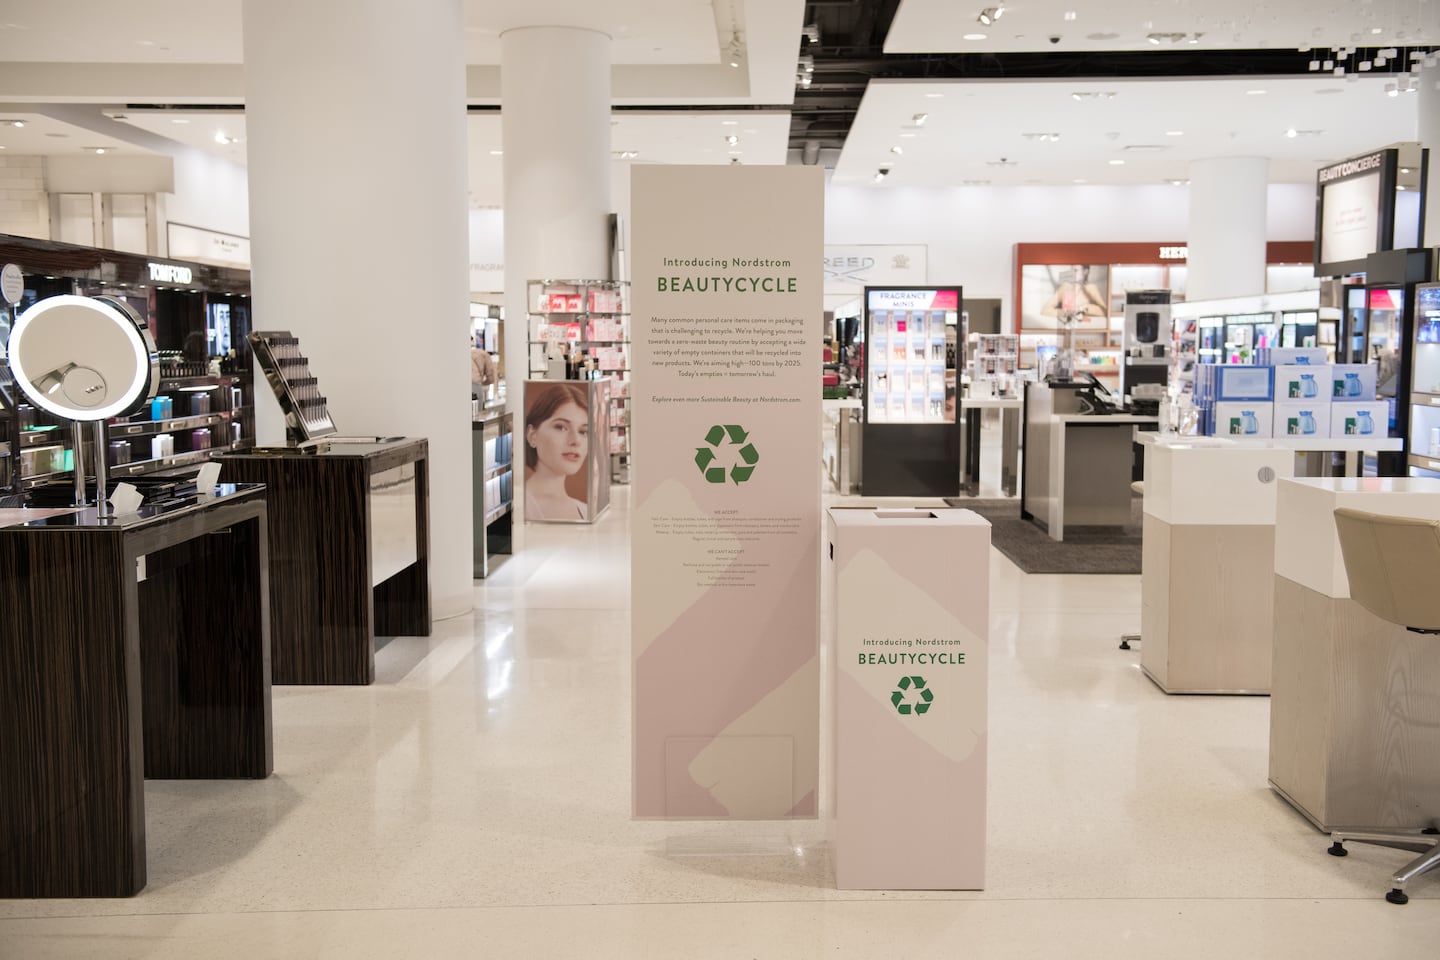 Nordstrom and other retailers are making it easier for shoppers to recycle beauty product packaging. Source: Courtesy.